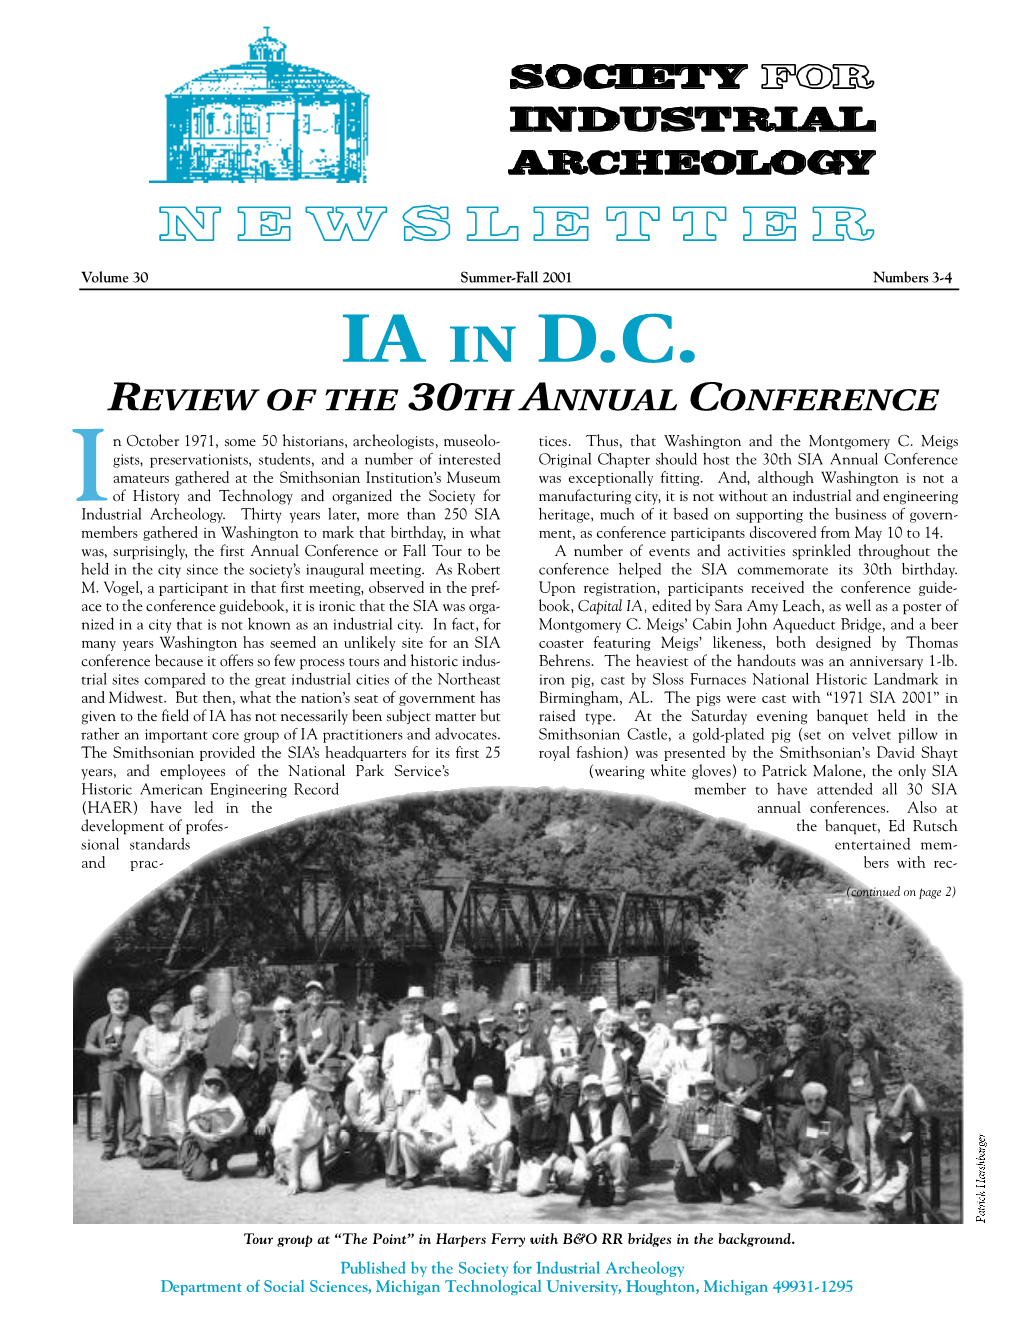 IA in D.C. REVIEW of the 30TH ANNUAL CONFERENCE N October 1971, Some 50 Historians, Archeologists, Museolo- Tices